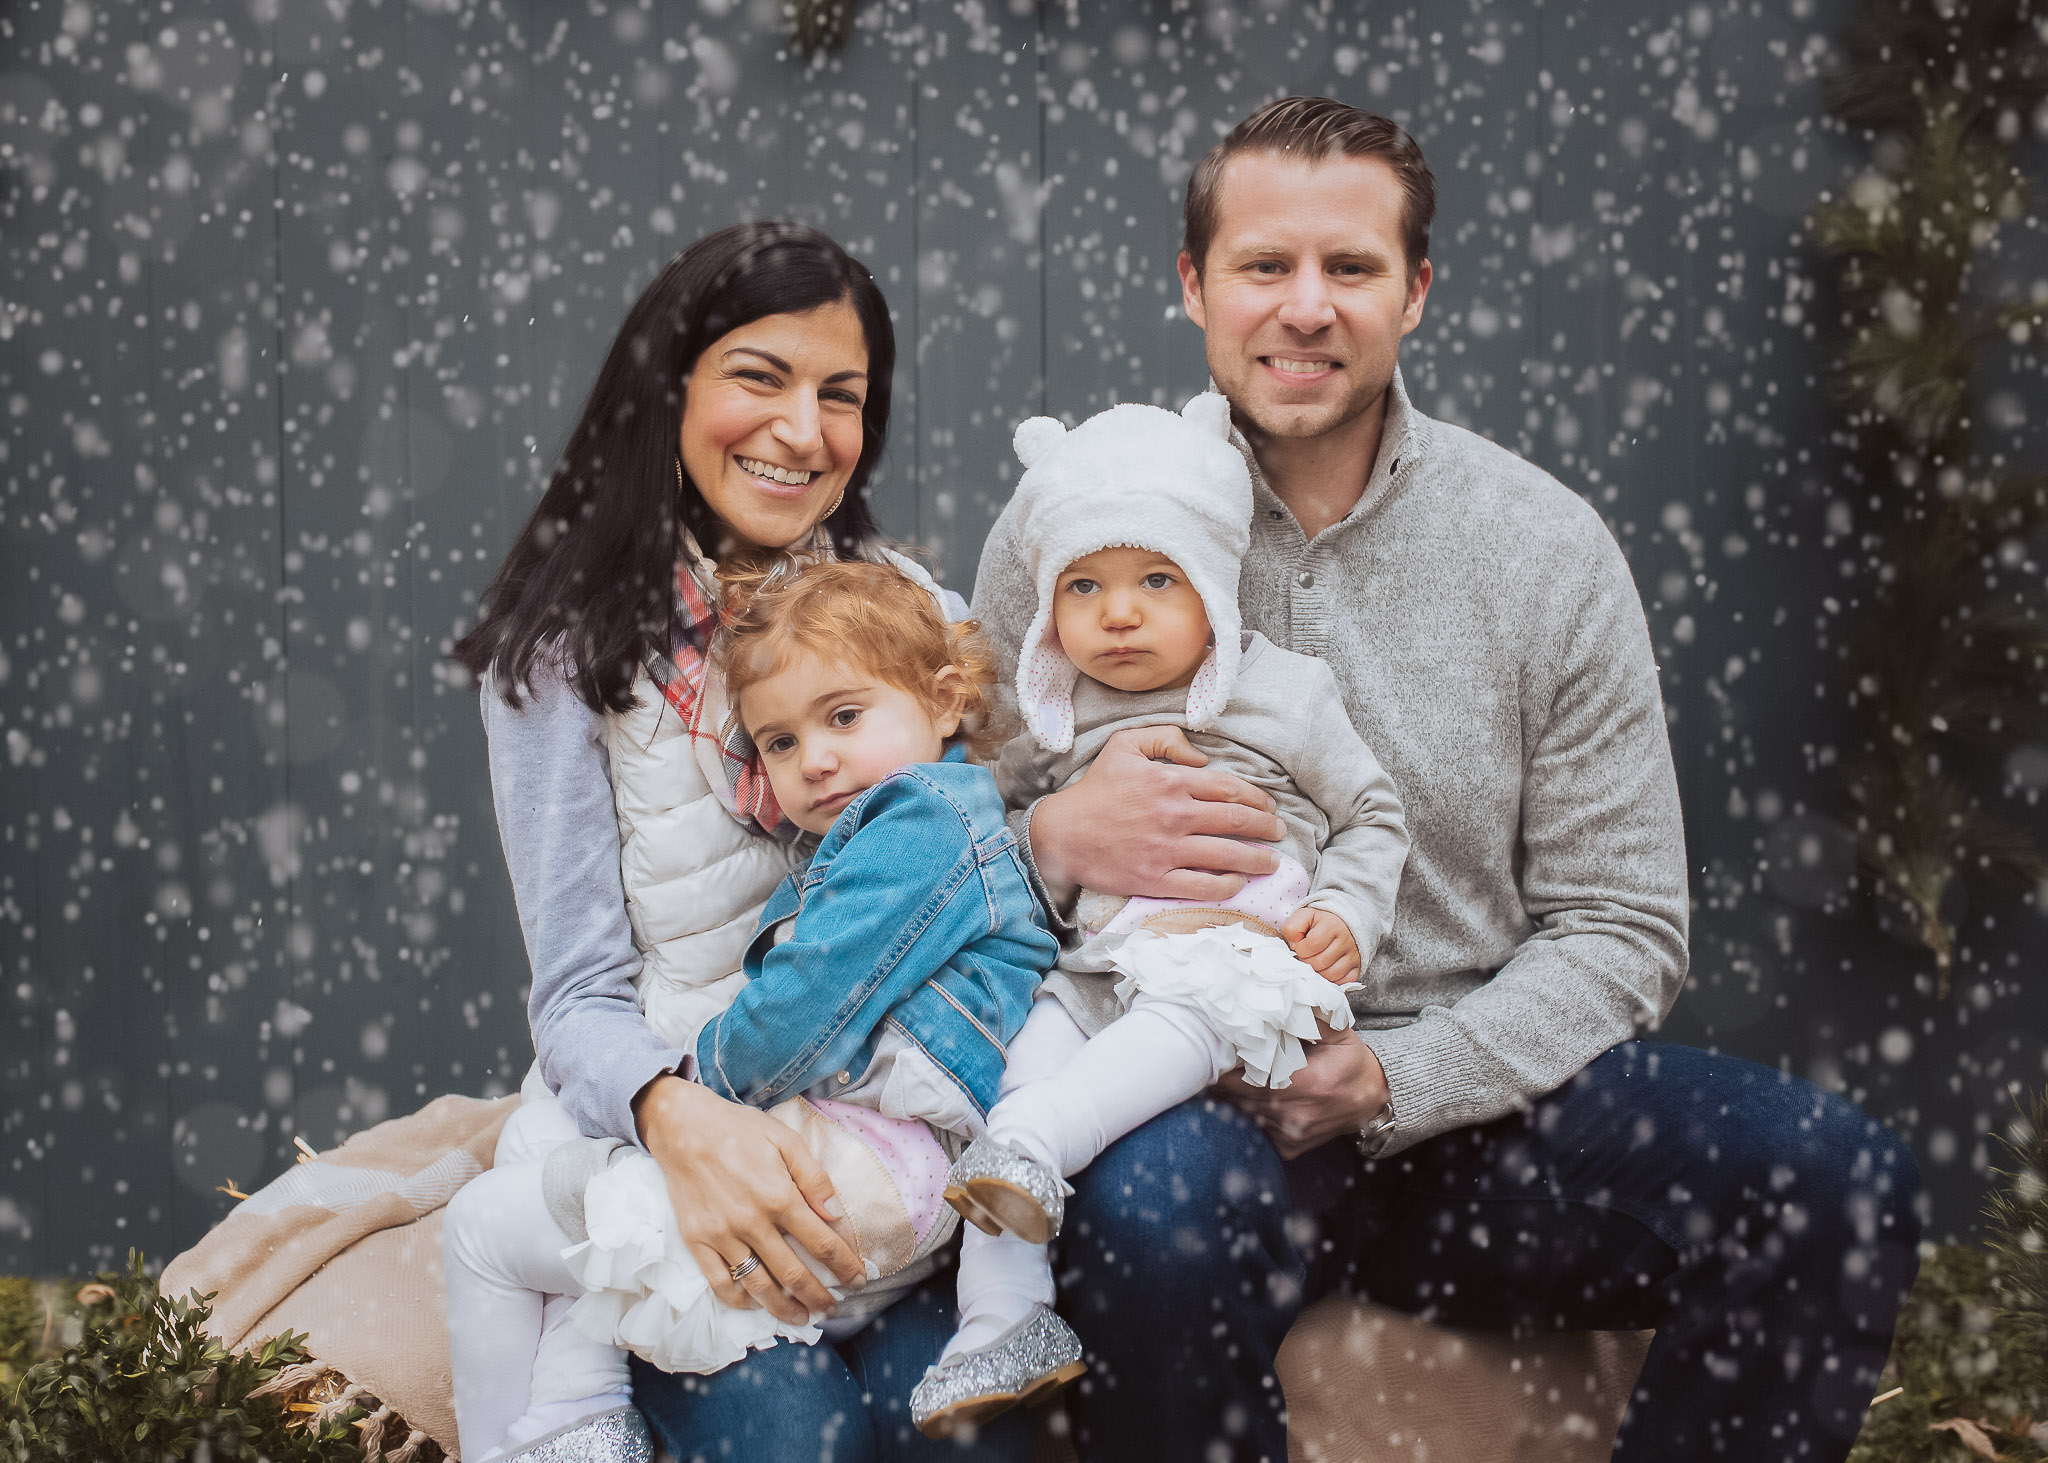 This adorable family had to cuddle close during a 10 minute snow fall we had. I have to say it looks pretty in the photos though